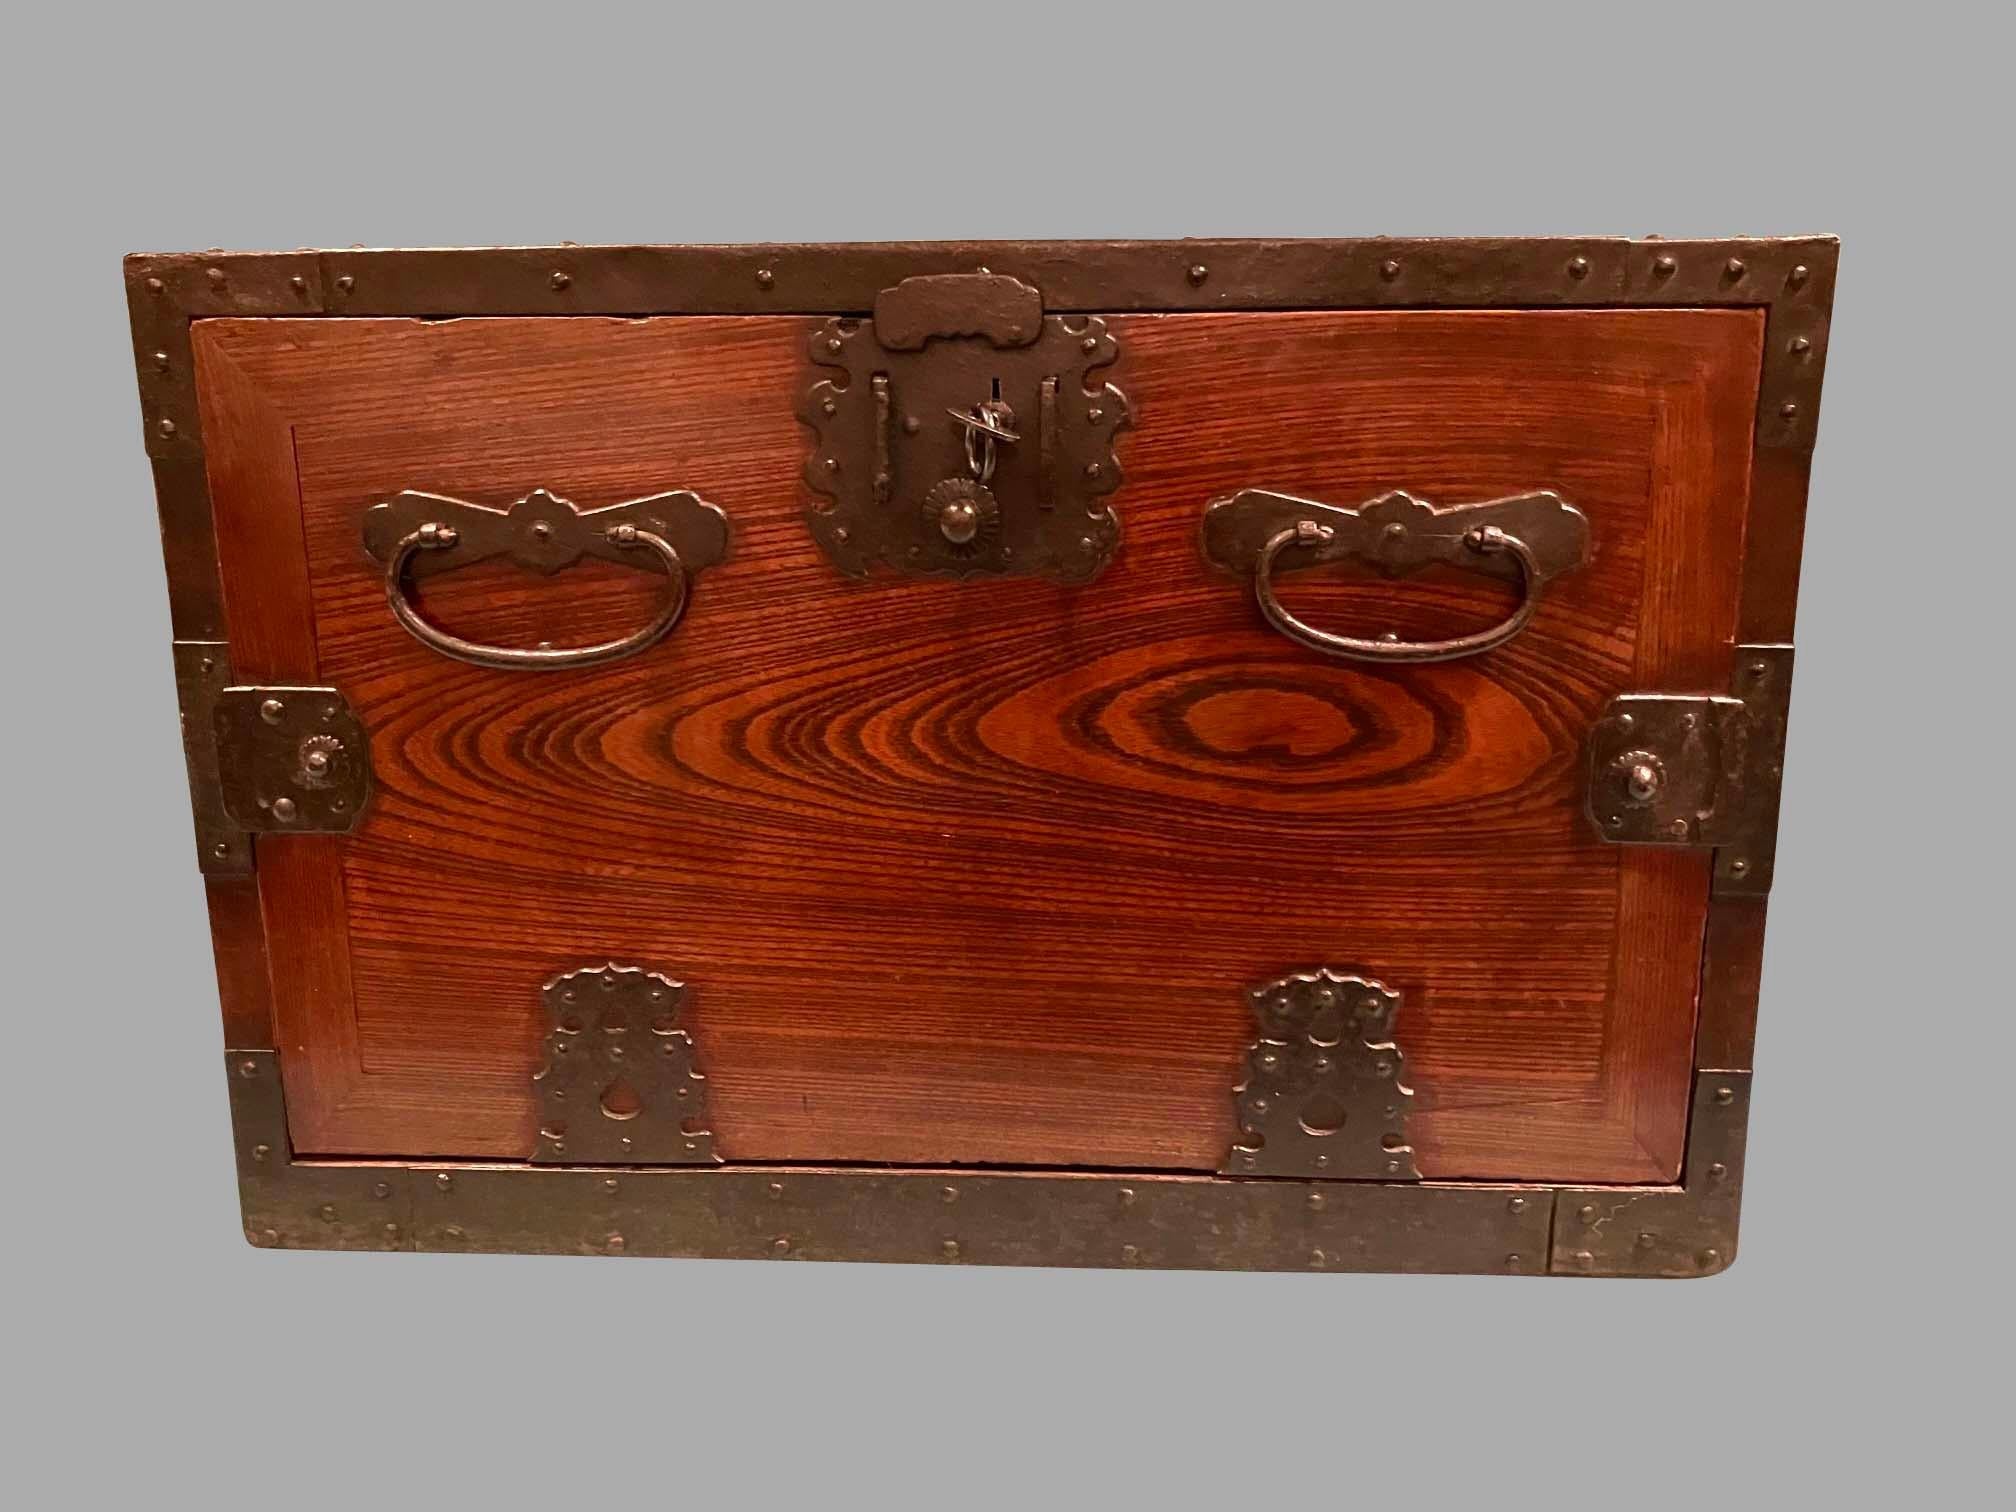 A Japanese Meiji period iron mounted sea chest or table cabinet, the removable front cover opening to reveal an interior with 5 drawers of varying sizes. The piece is mounted with decorative iron corners and lock plates typical of the form.